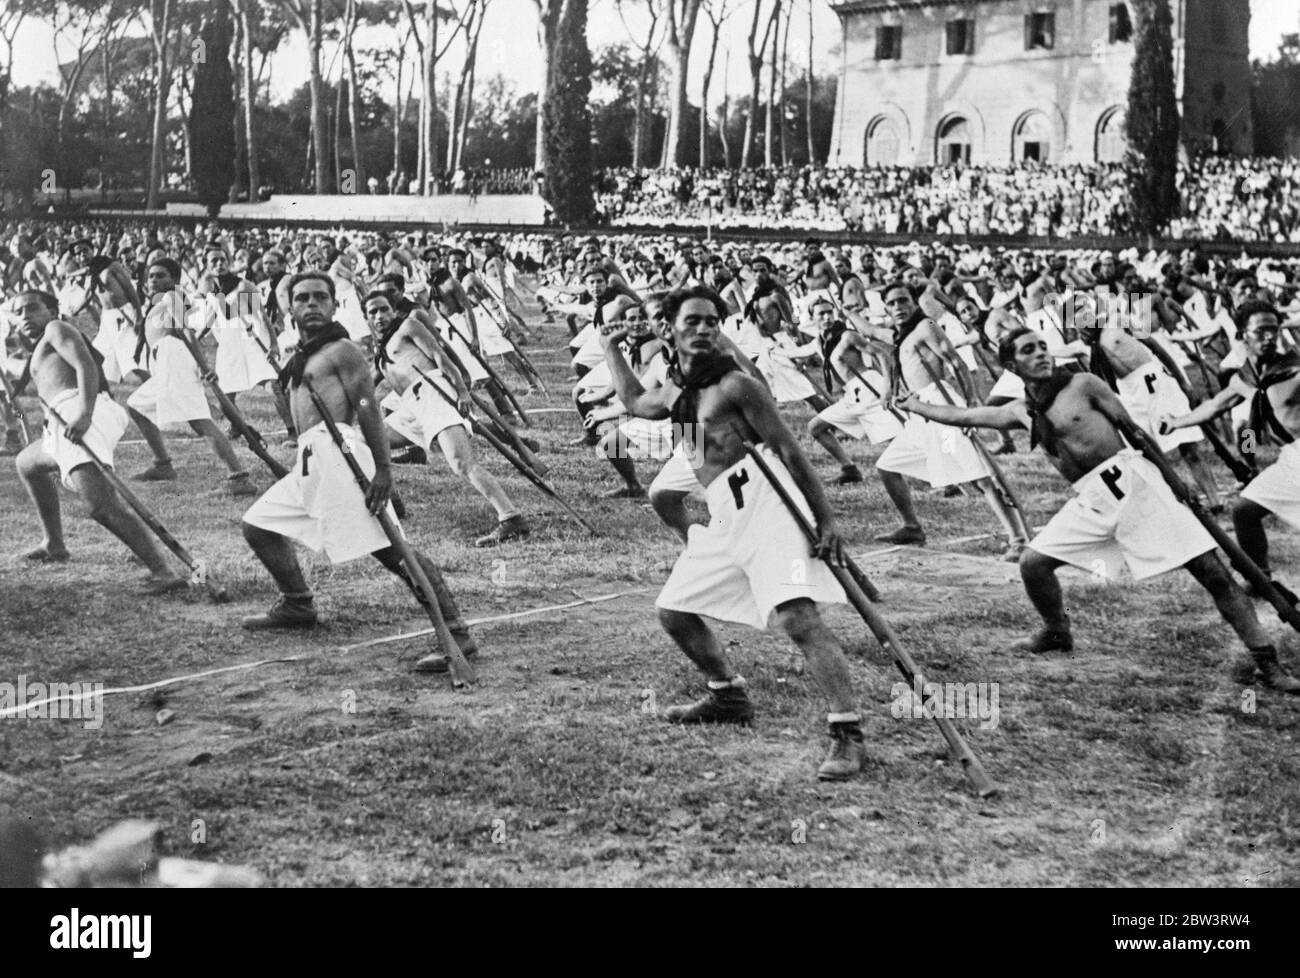 Italy ' s youth displays strength for Mussolini . In the midst of the greatest international crisis he has yet faced , Signor Mussolini took time off to watch a gymnastic display by a young Fascist in the Piassa di Siene , Rome . Photo shows , the gymnastic display before Mussolini . 6 September 1935 Stock Photo